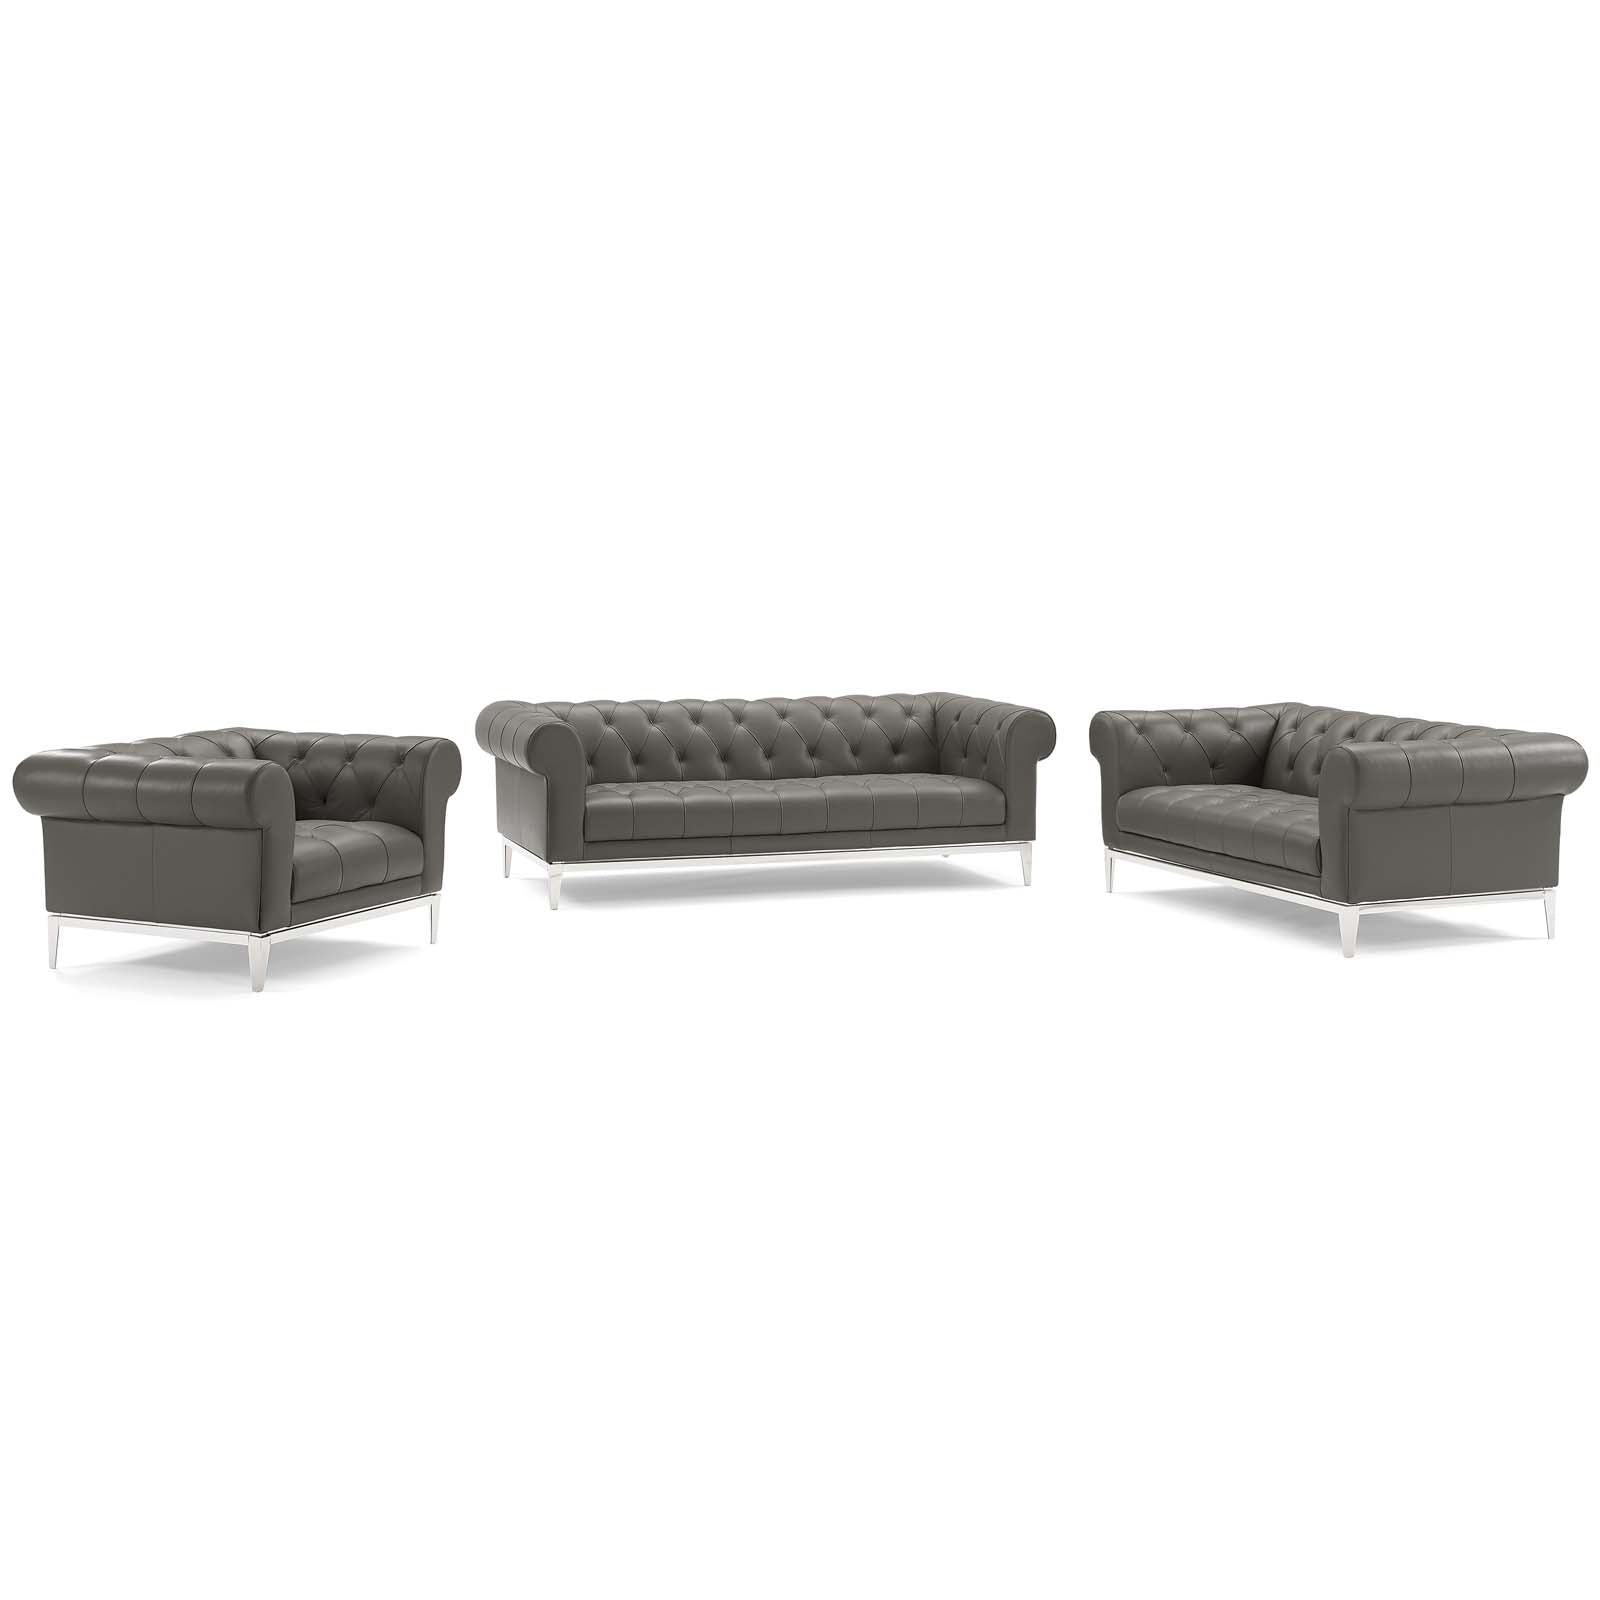 Idyll 3 Piece Upholstered Leather Set - East Shore Modern Home Furnishings